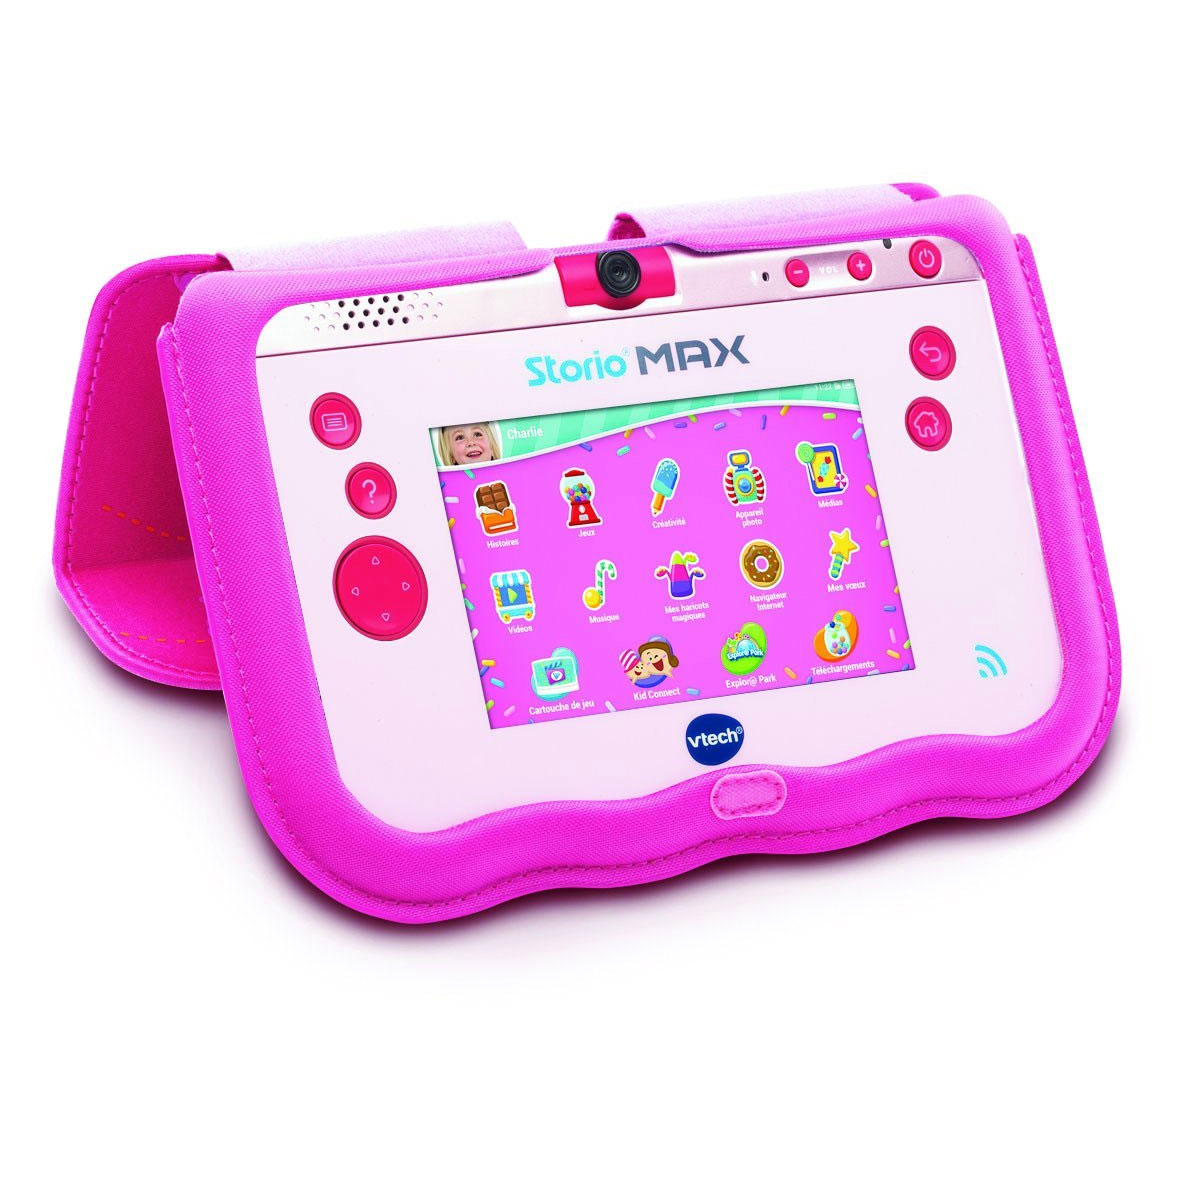 VTech Storio Max 5 - Pink Stand Case, 218559 - FR Version - Compatible  with Storio MAX 2.0 and Storio MAX